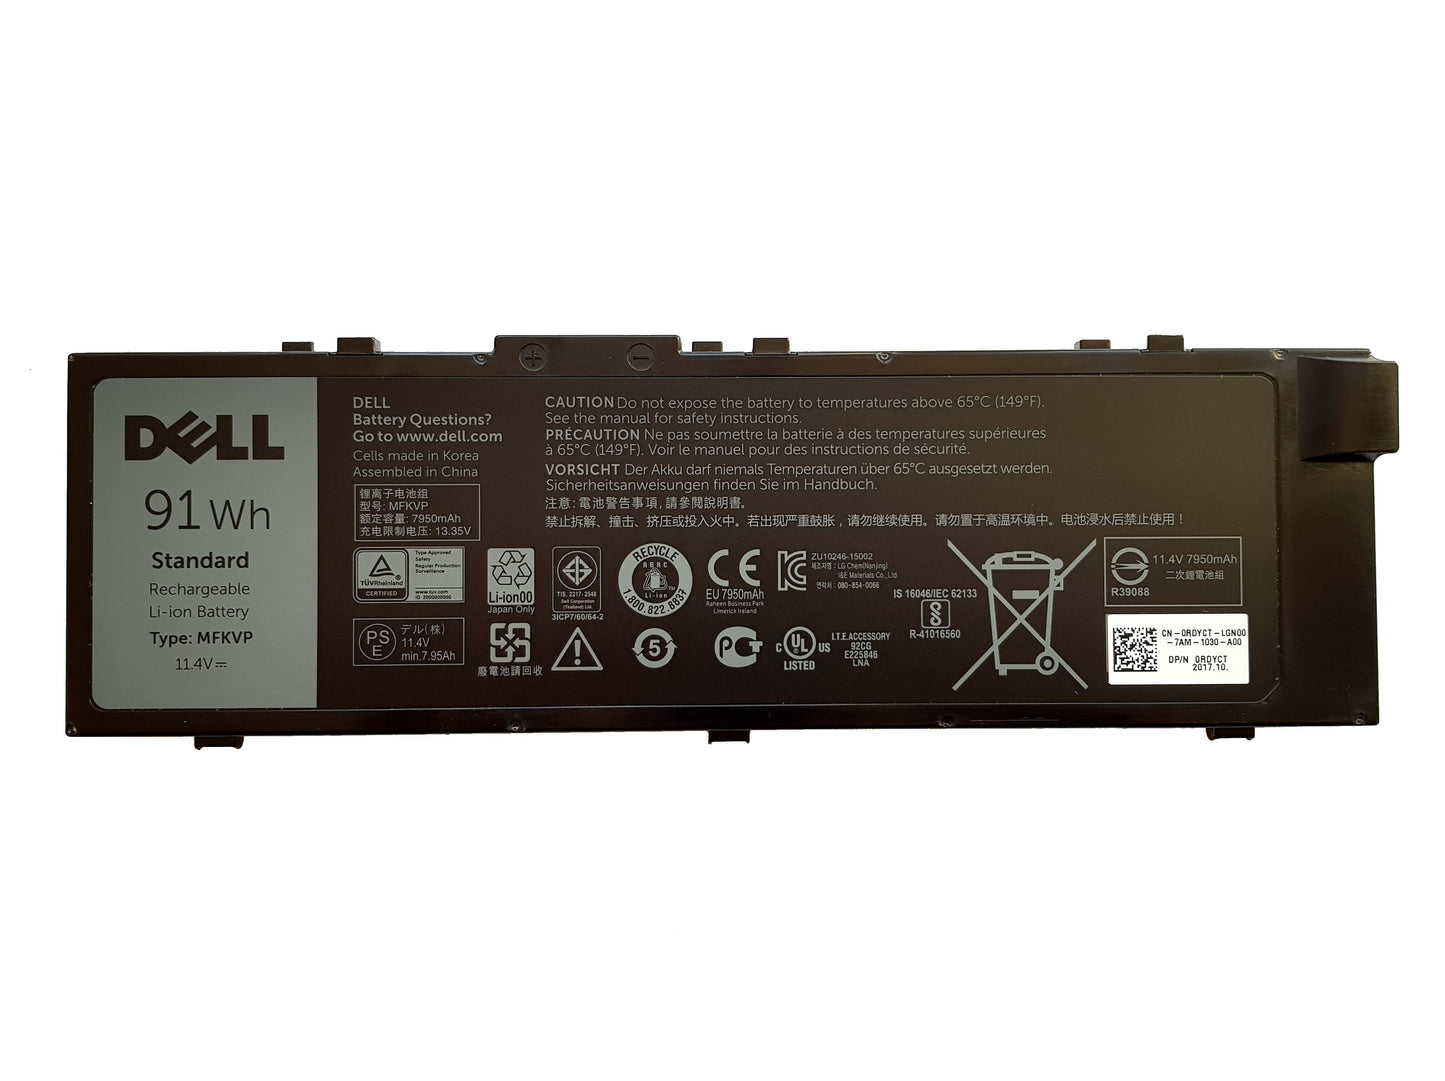 Dell Precision 7510 Laptop Battery 91Wh 6 Cell MFKVP RDYCT TWCPG